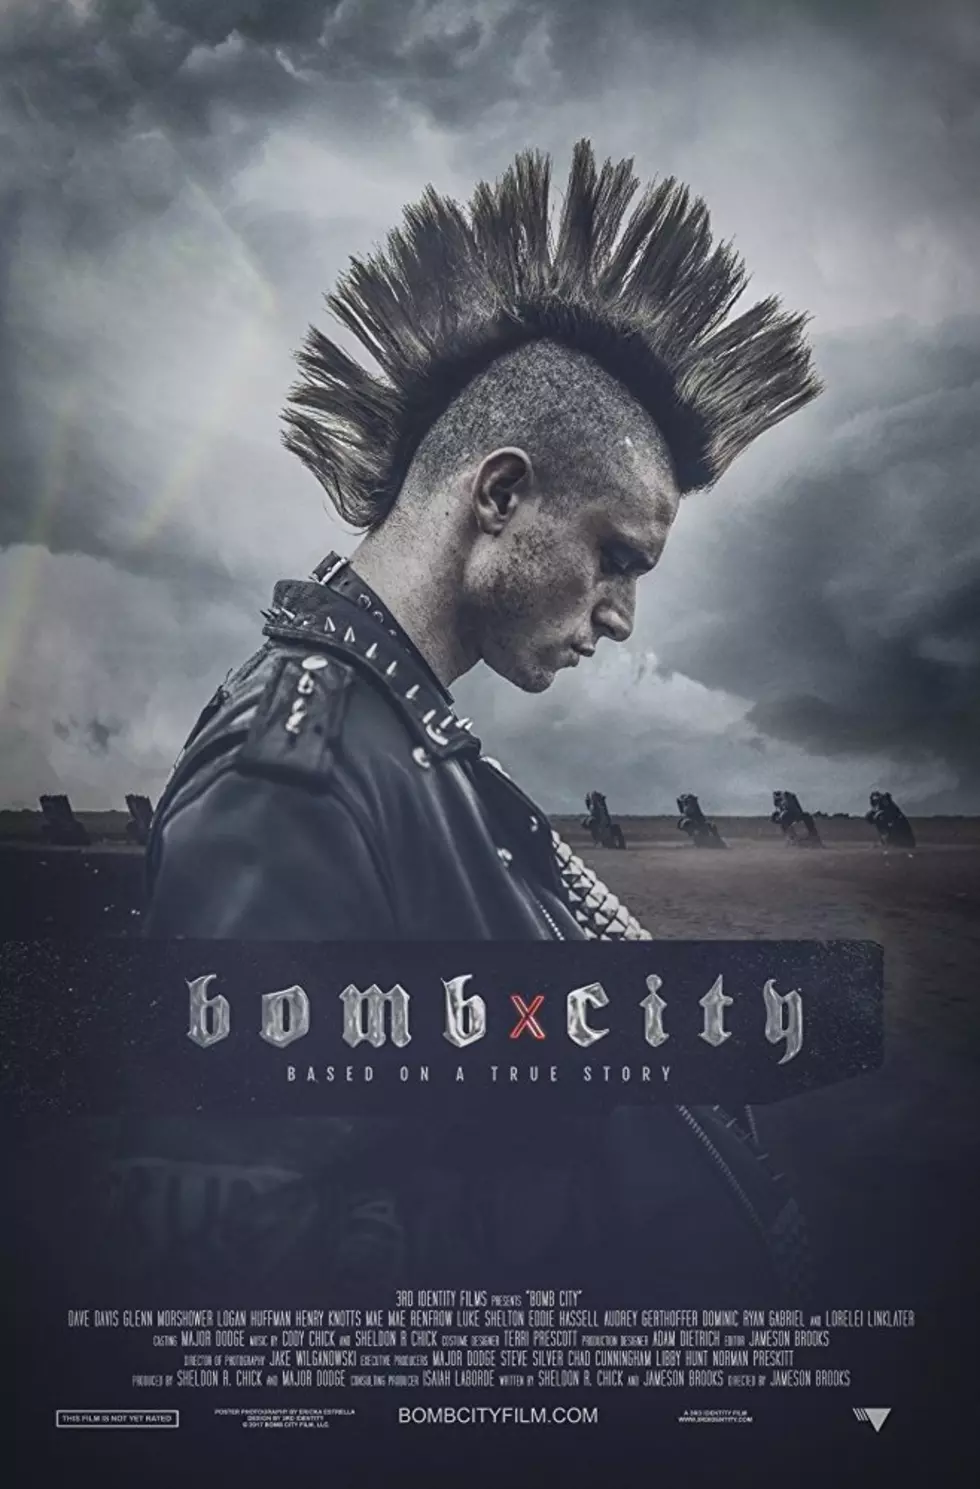 ‘Bomb City’ Film Release Extends to Lubbock Beginning February 9th